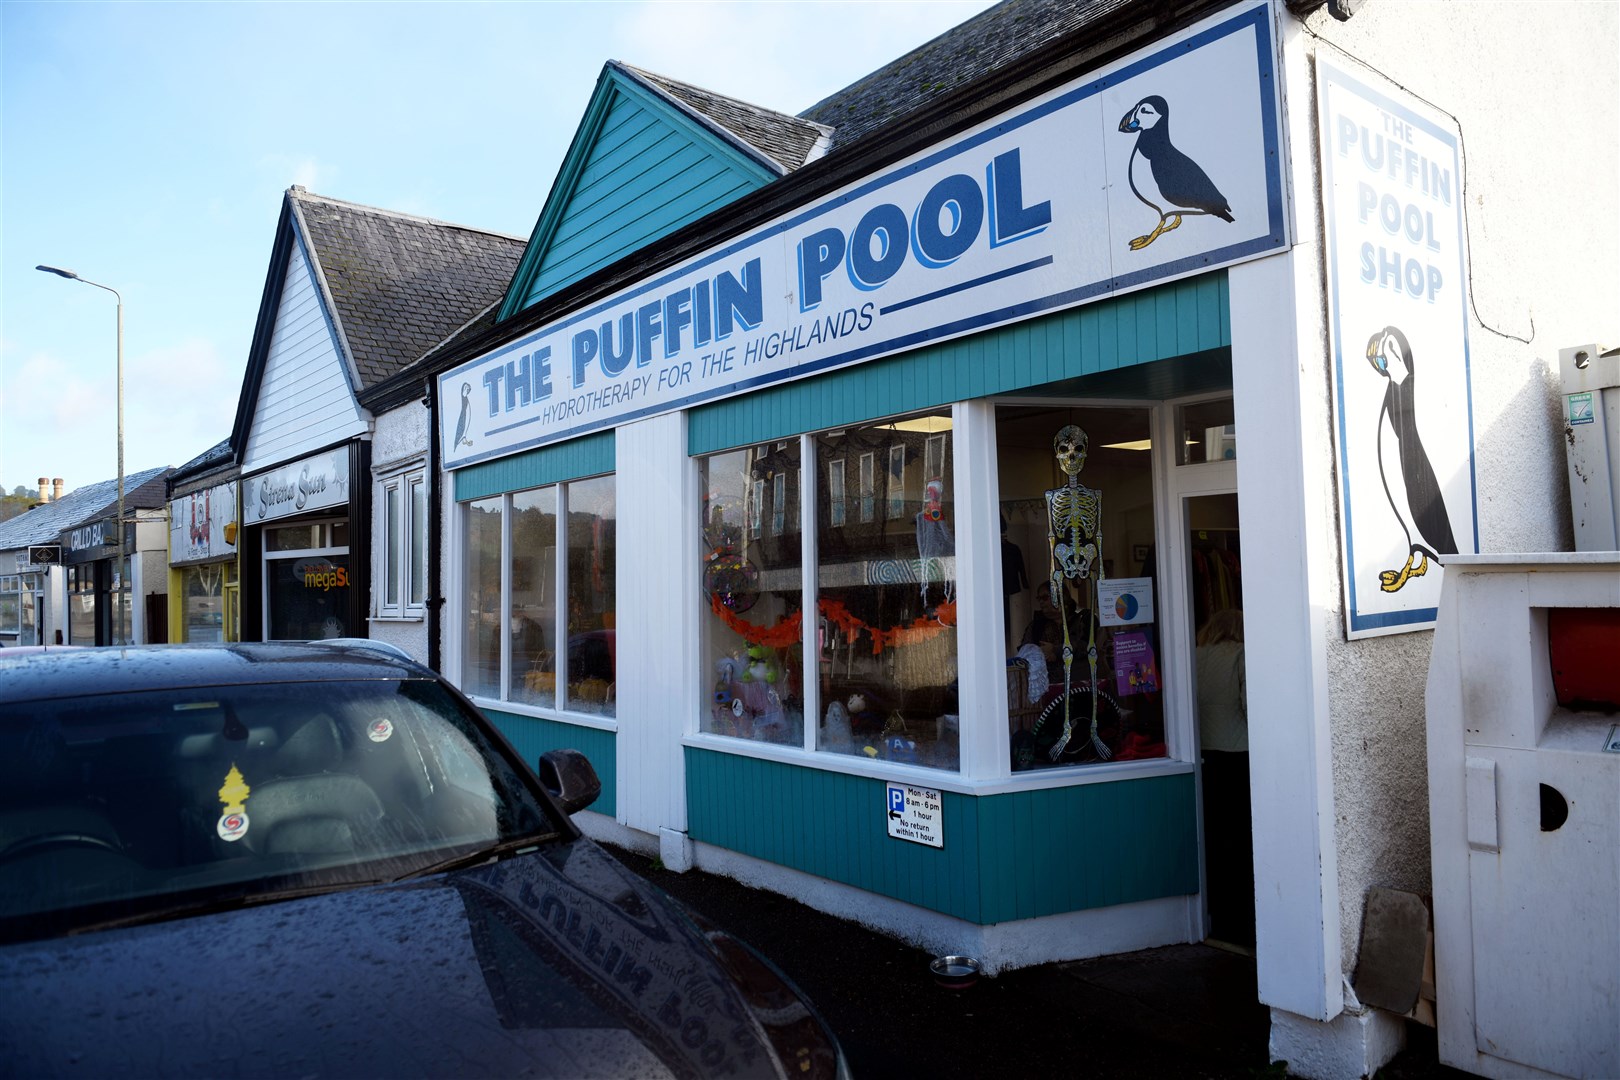 The Puffin Pool shop helps to raise vital funds.